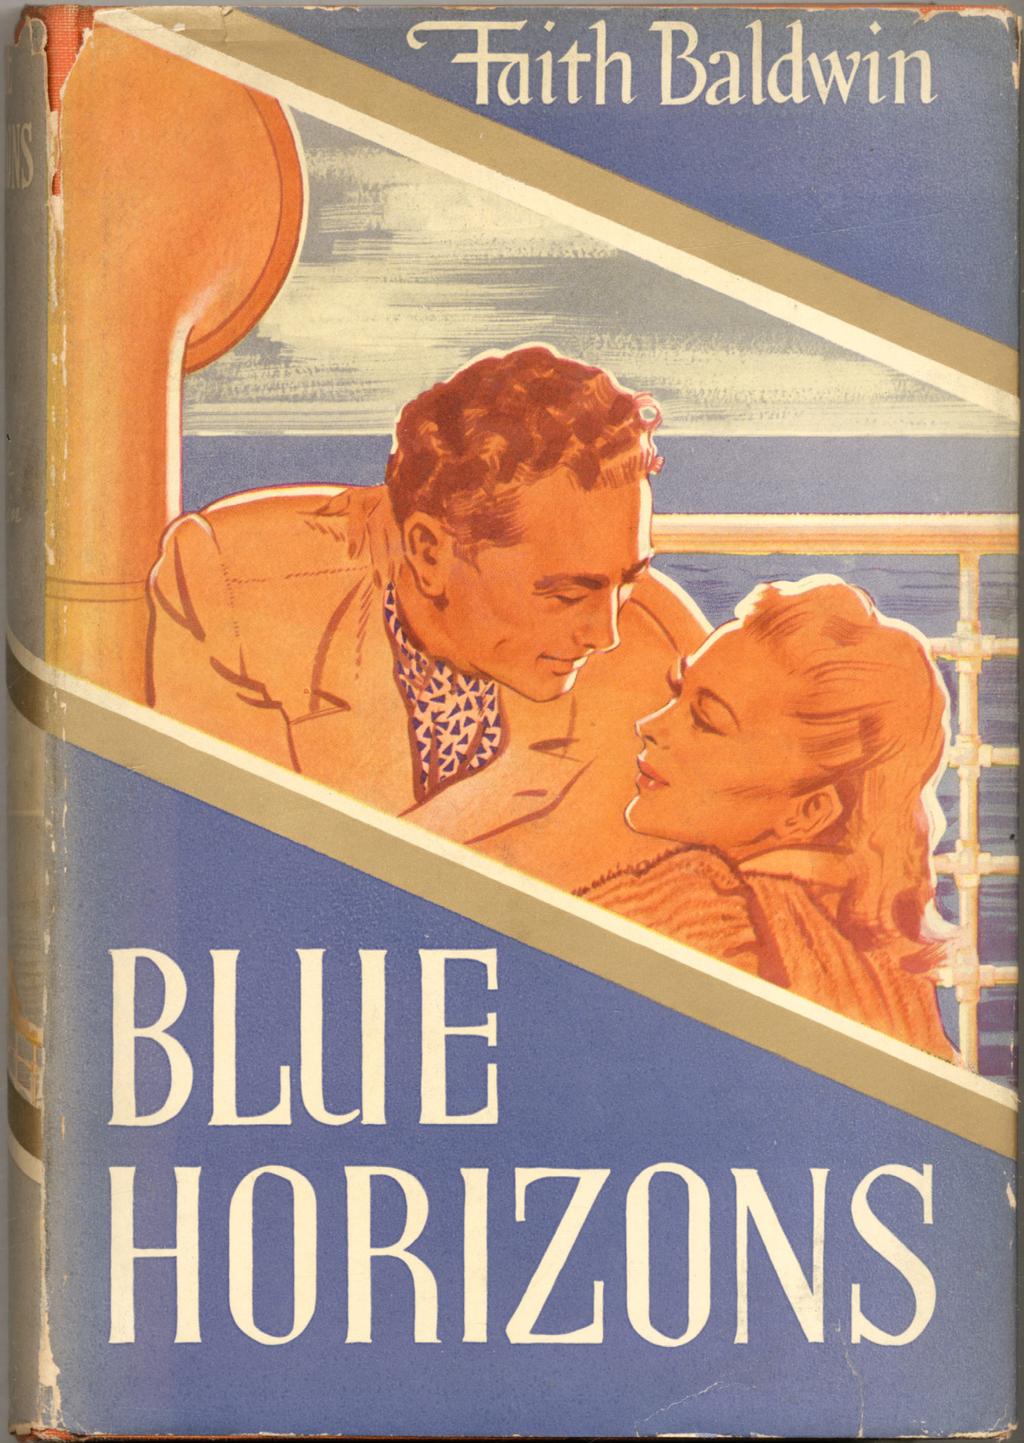 Blue Horizons New York: Farrar and Rinehart (1942) $250 First edition. About fine in very good dustwrapper with shallow chipping and some sunning at the spine.